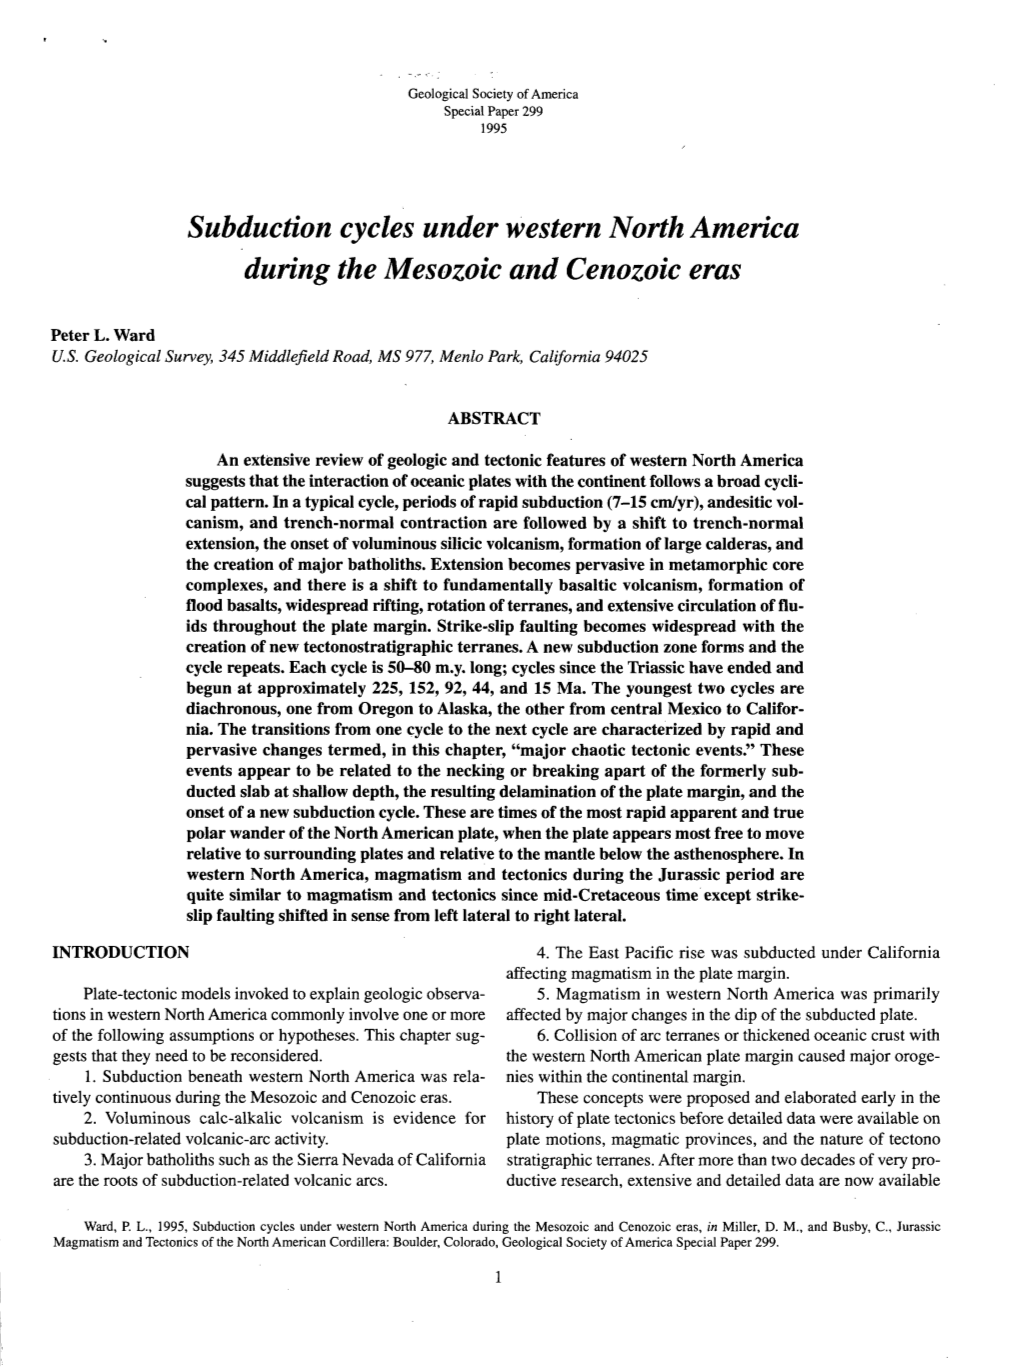 Subduction Cycles Under Western North America During the Mesozoic and Cenozoic Eras